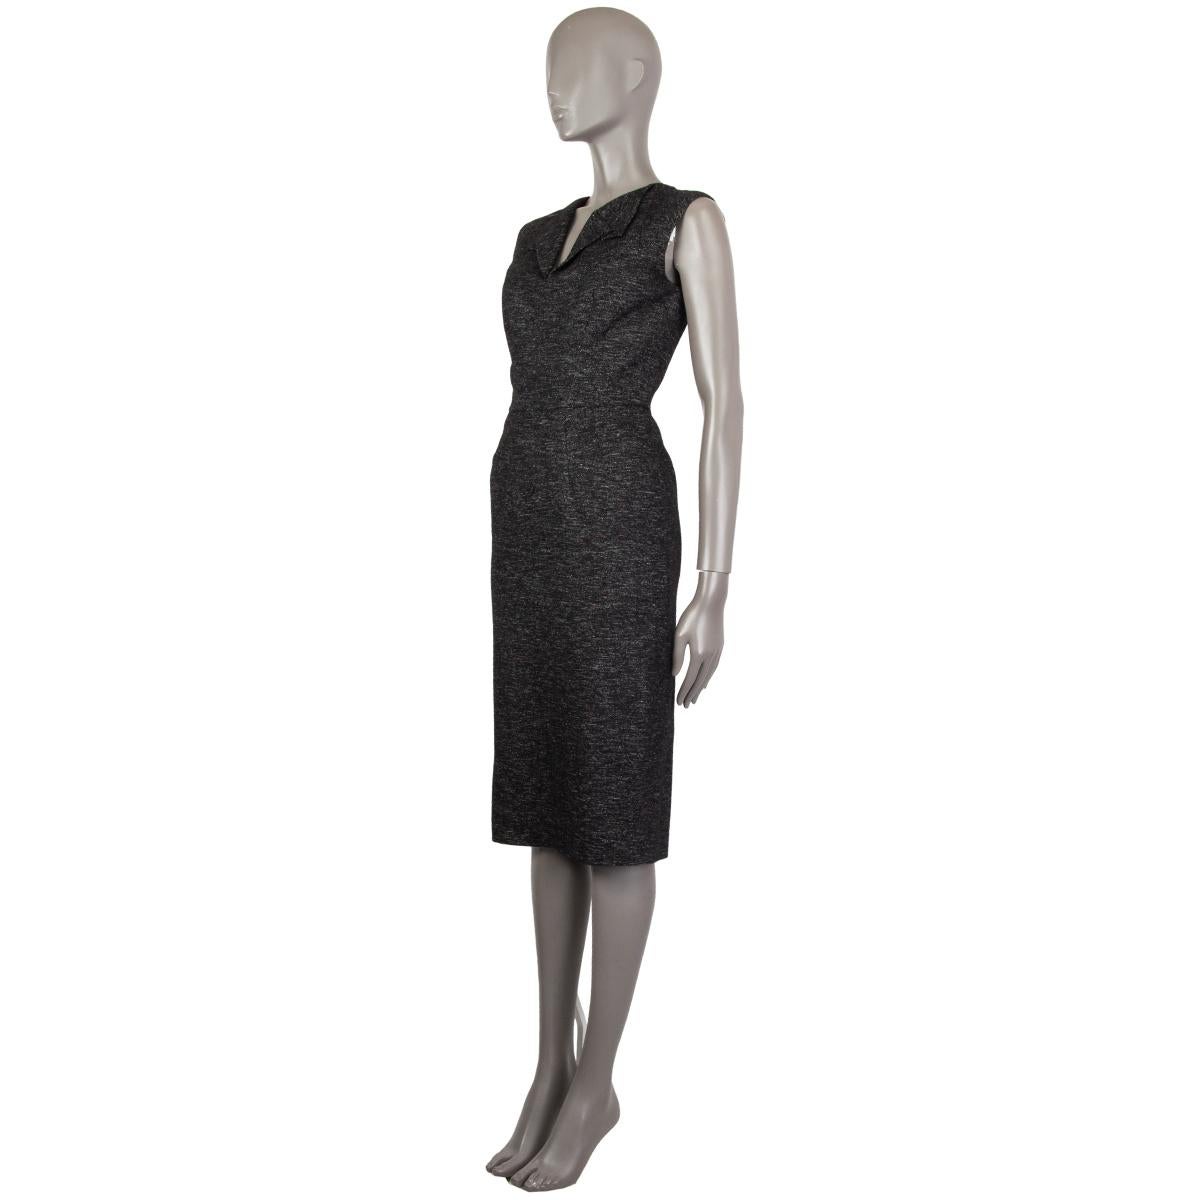 100% authentic Roland Mouret limited edition for Net-A-Porter sheath dress in black, white and anthracite wool (38%) viscose (29%) cotton (21%) other (11%) elastane (1%) with a V-neck detailed with a folded collar, sleeveless, close fitted